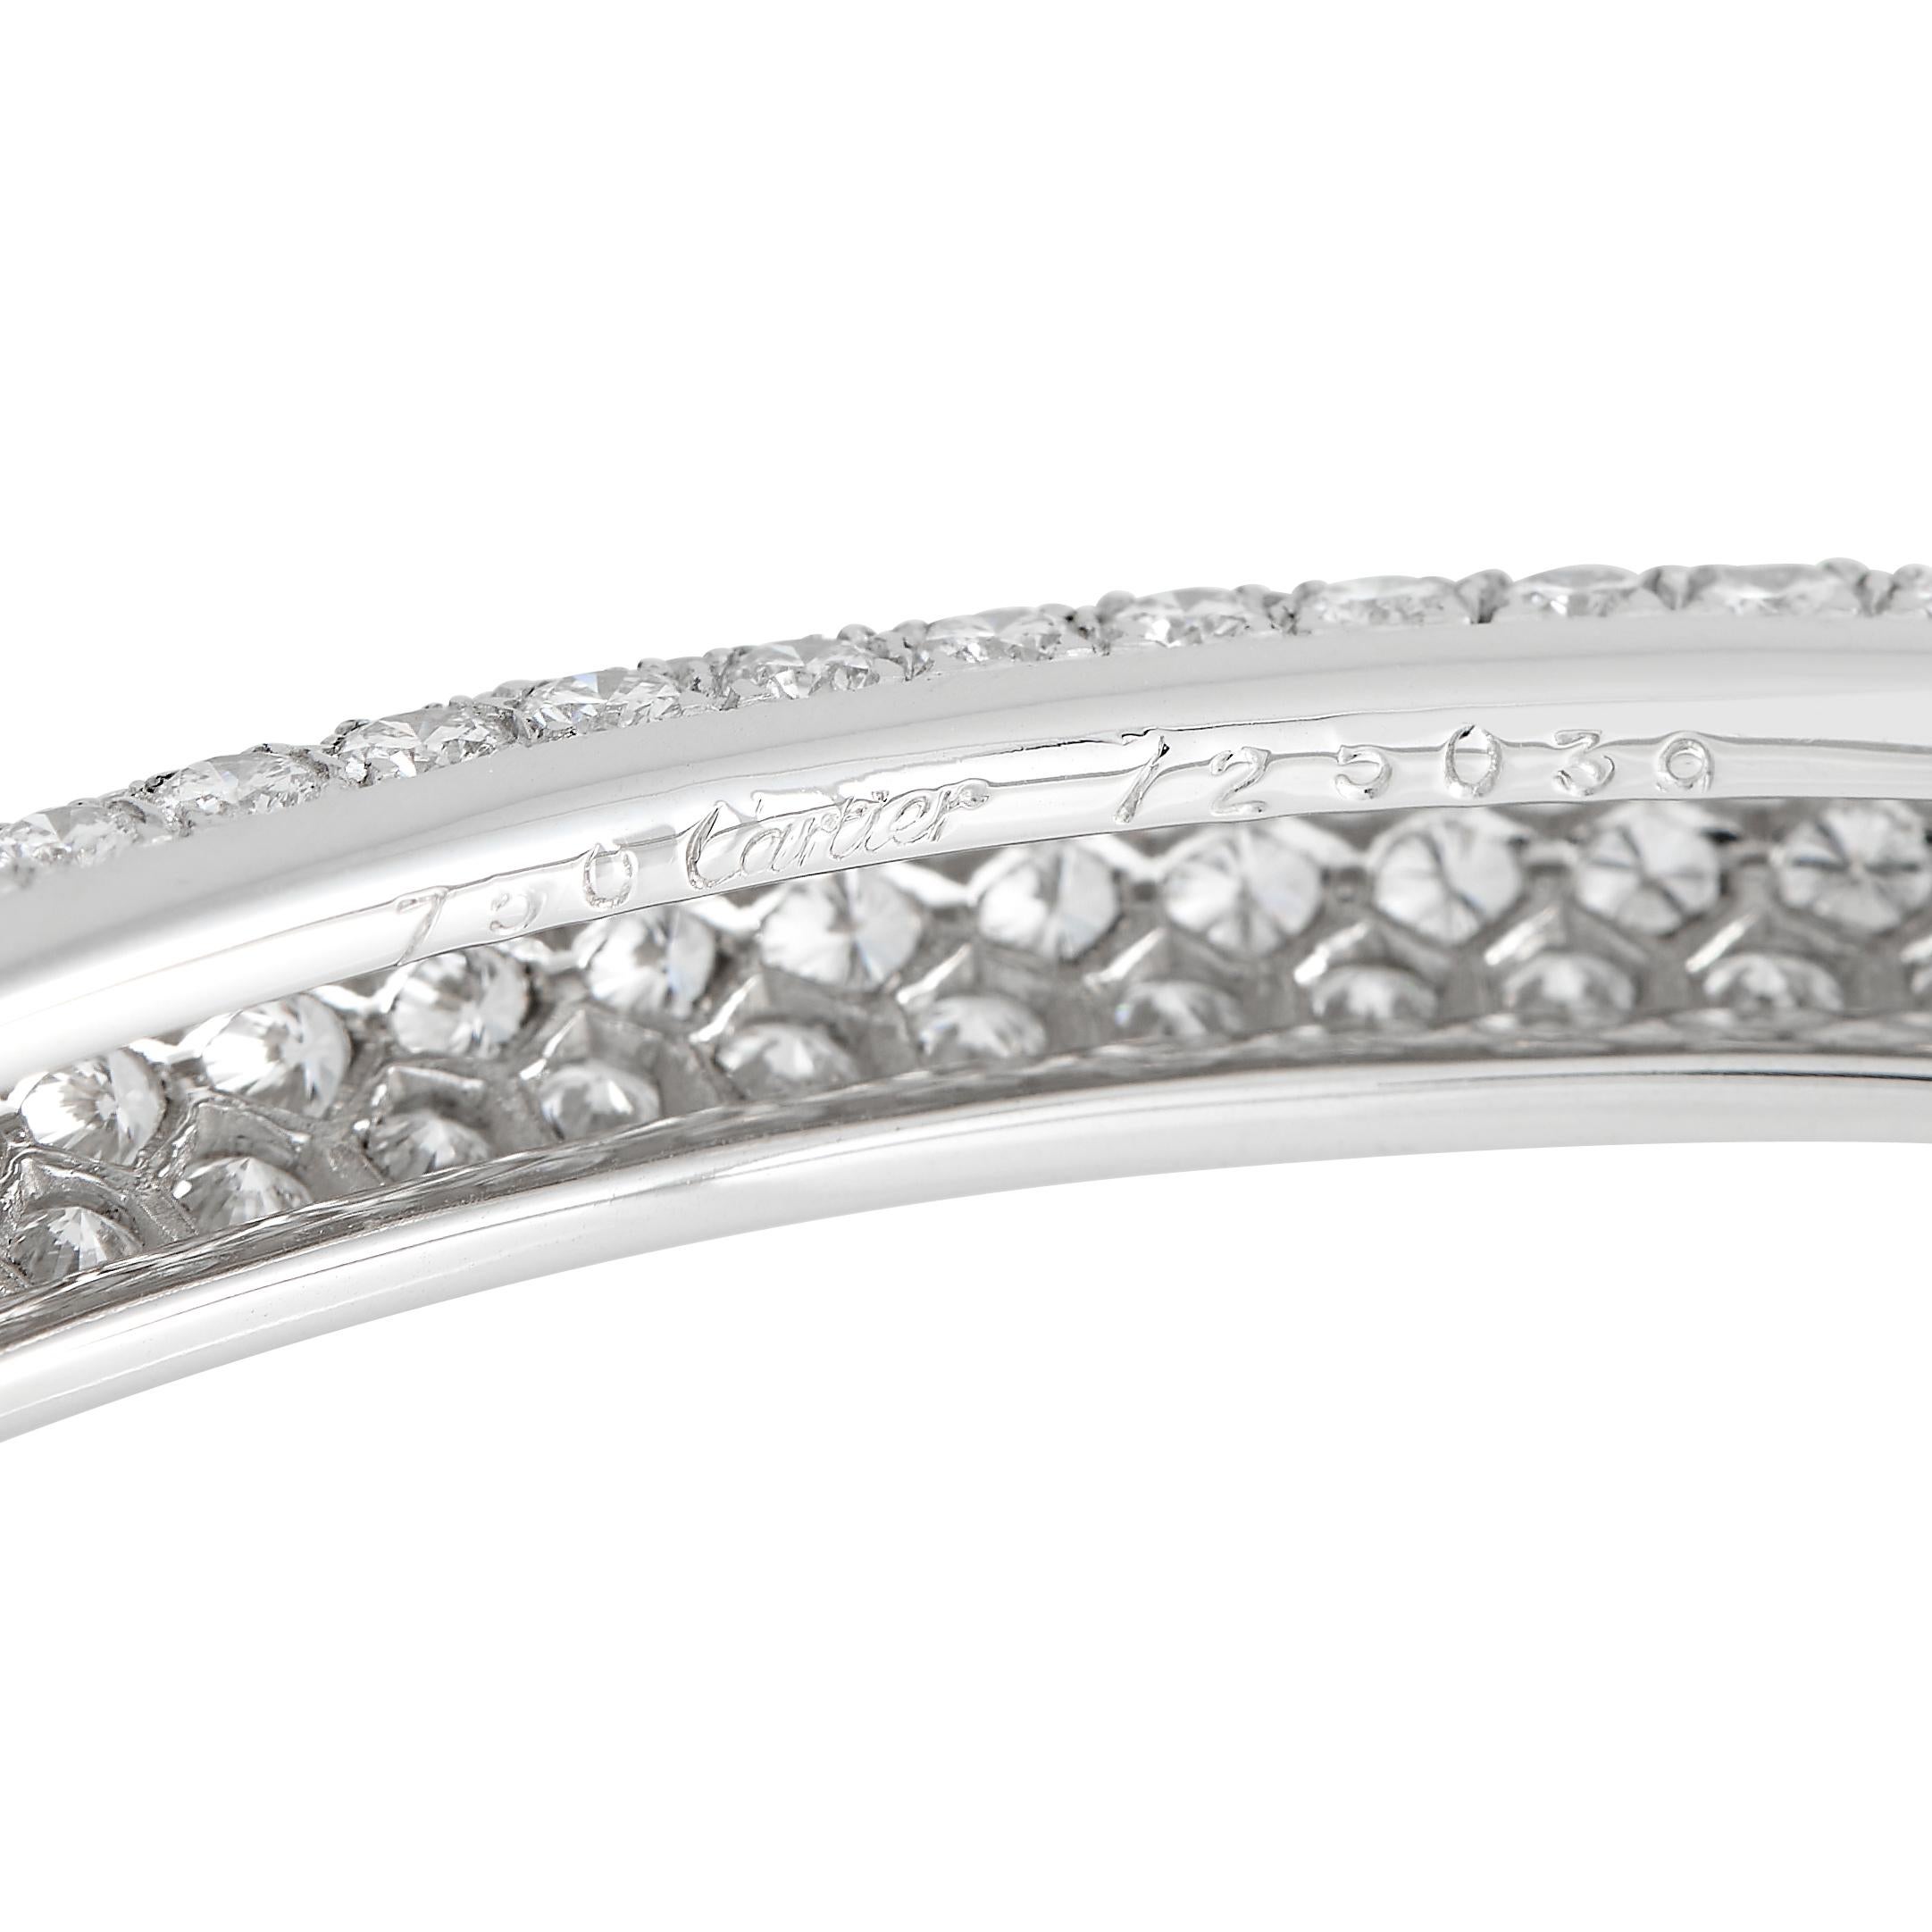 Cartier 18K White Gold 13.50ct Diamond Pav Bangle Bracelet In Excellent Condition For Sale In Southampton, PA